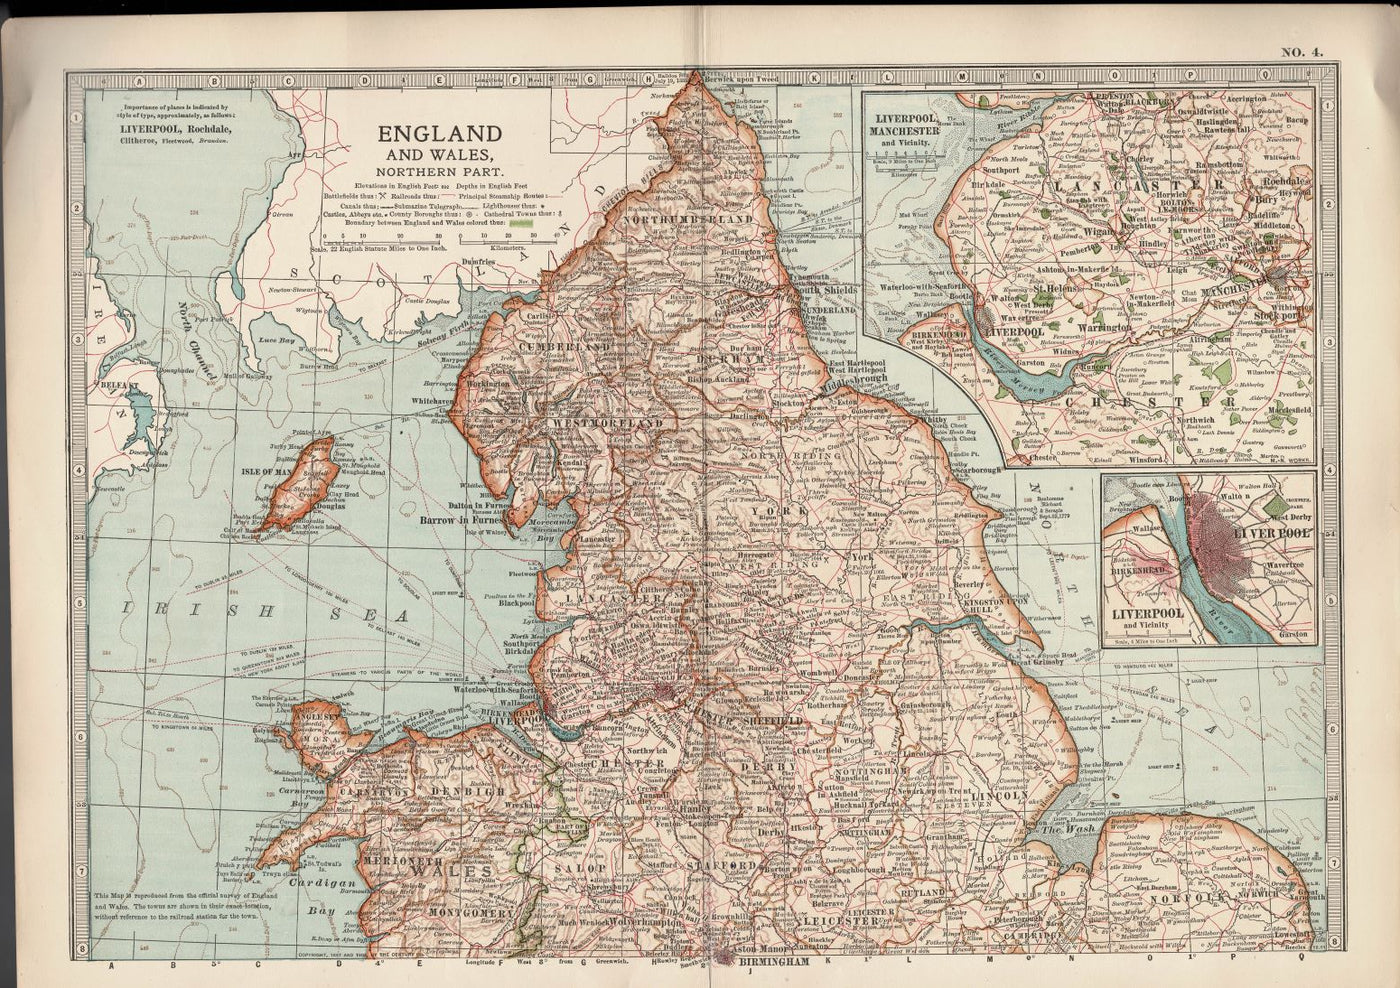 England and Wales Northern Parts antique map Encyclopedia Britannica 1903